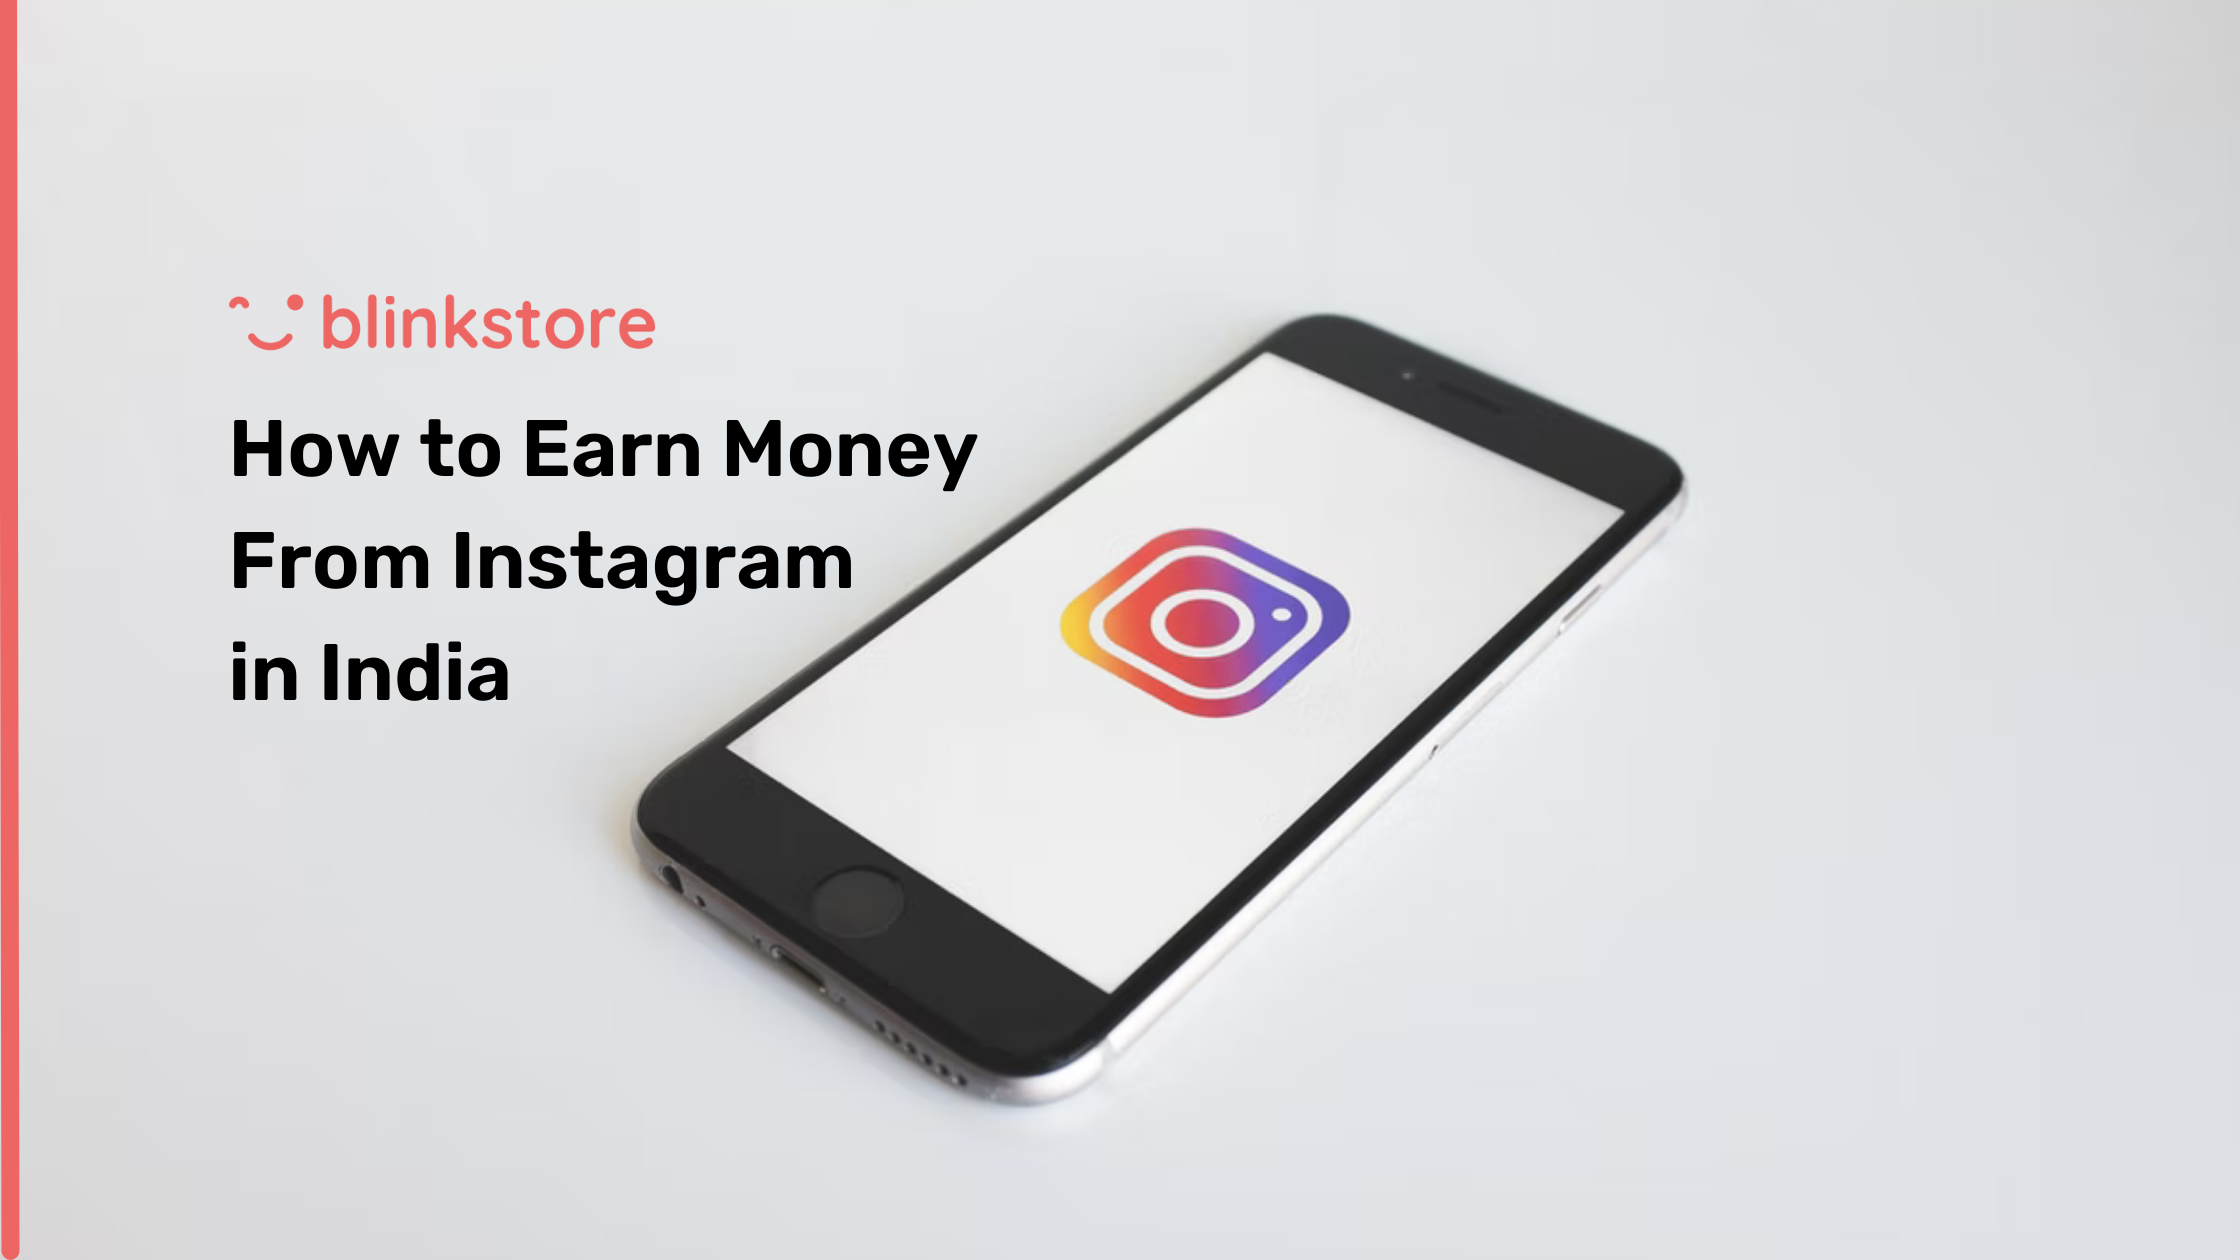 How to earn money from Instagram in India